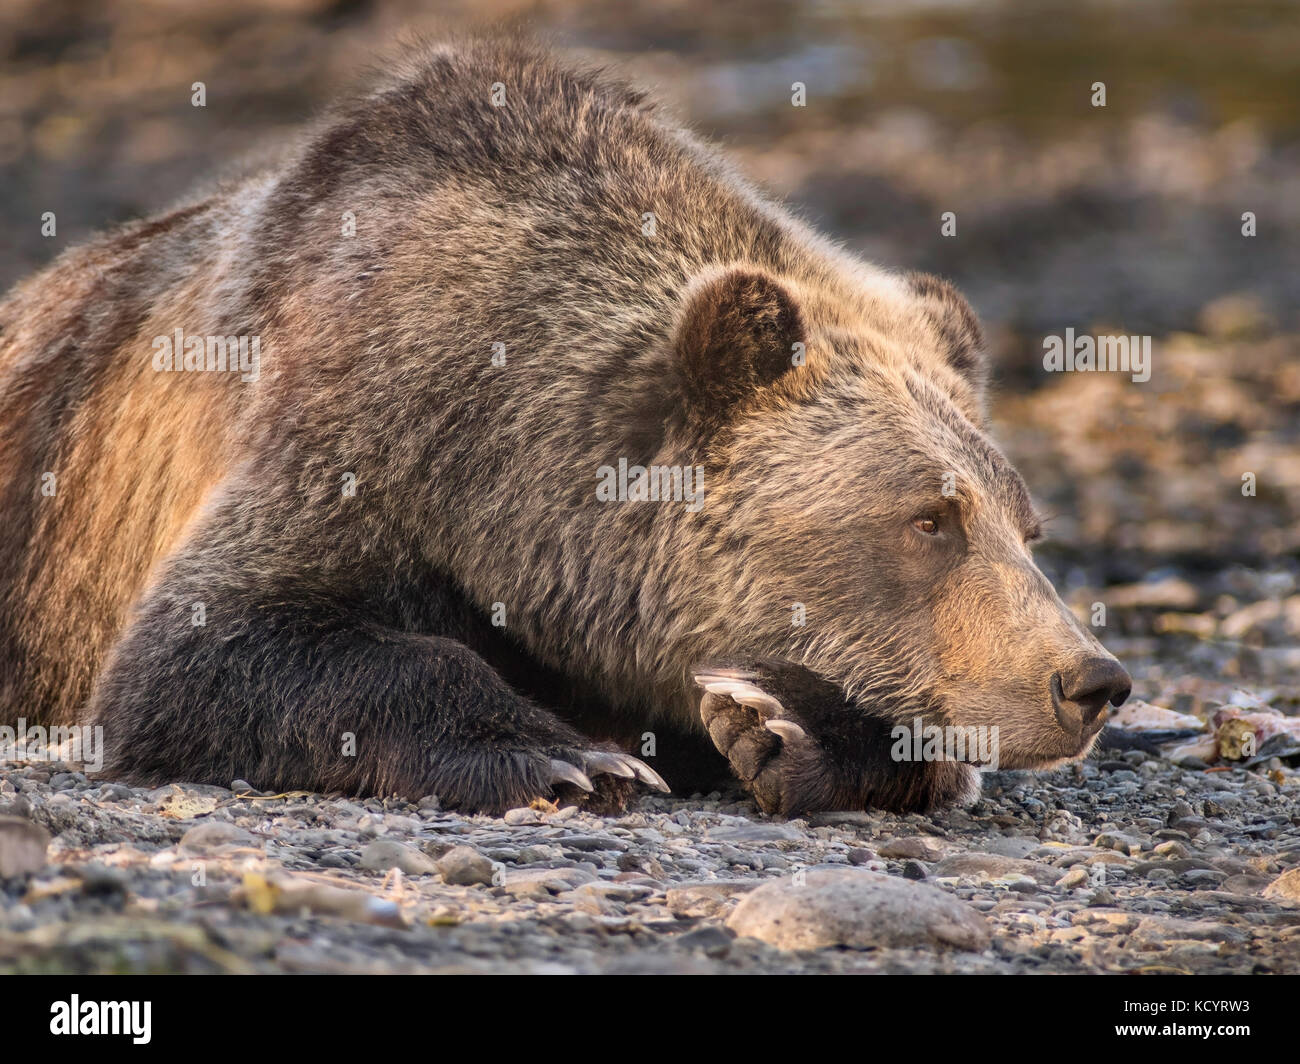 Grizzly Bear (Ursus arctos horribilis), Adult, Female, lying on gravel river bank of salmon stream, Central British Columbia, Canada Stock Photo